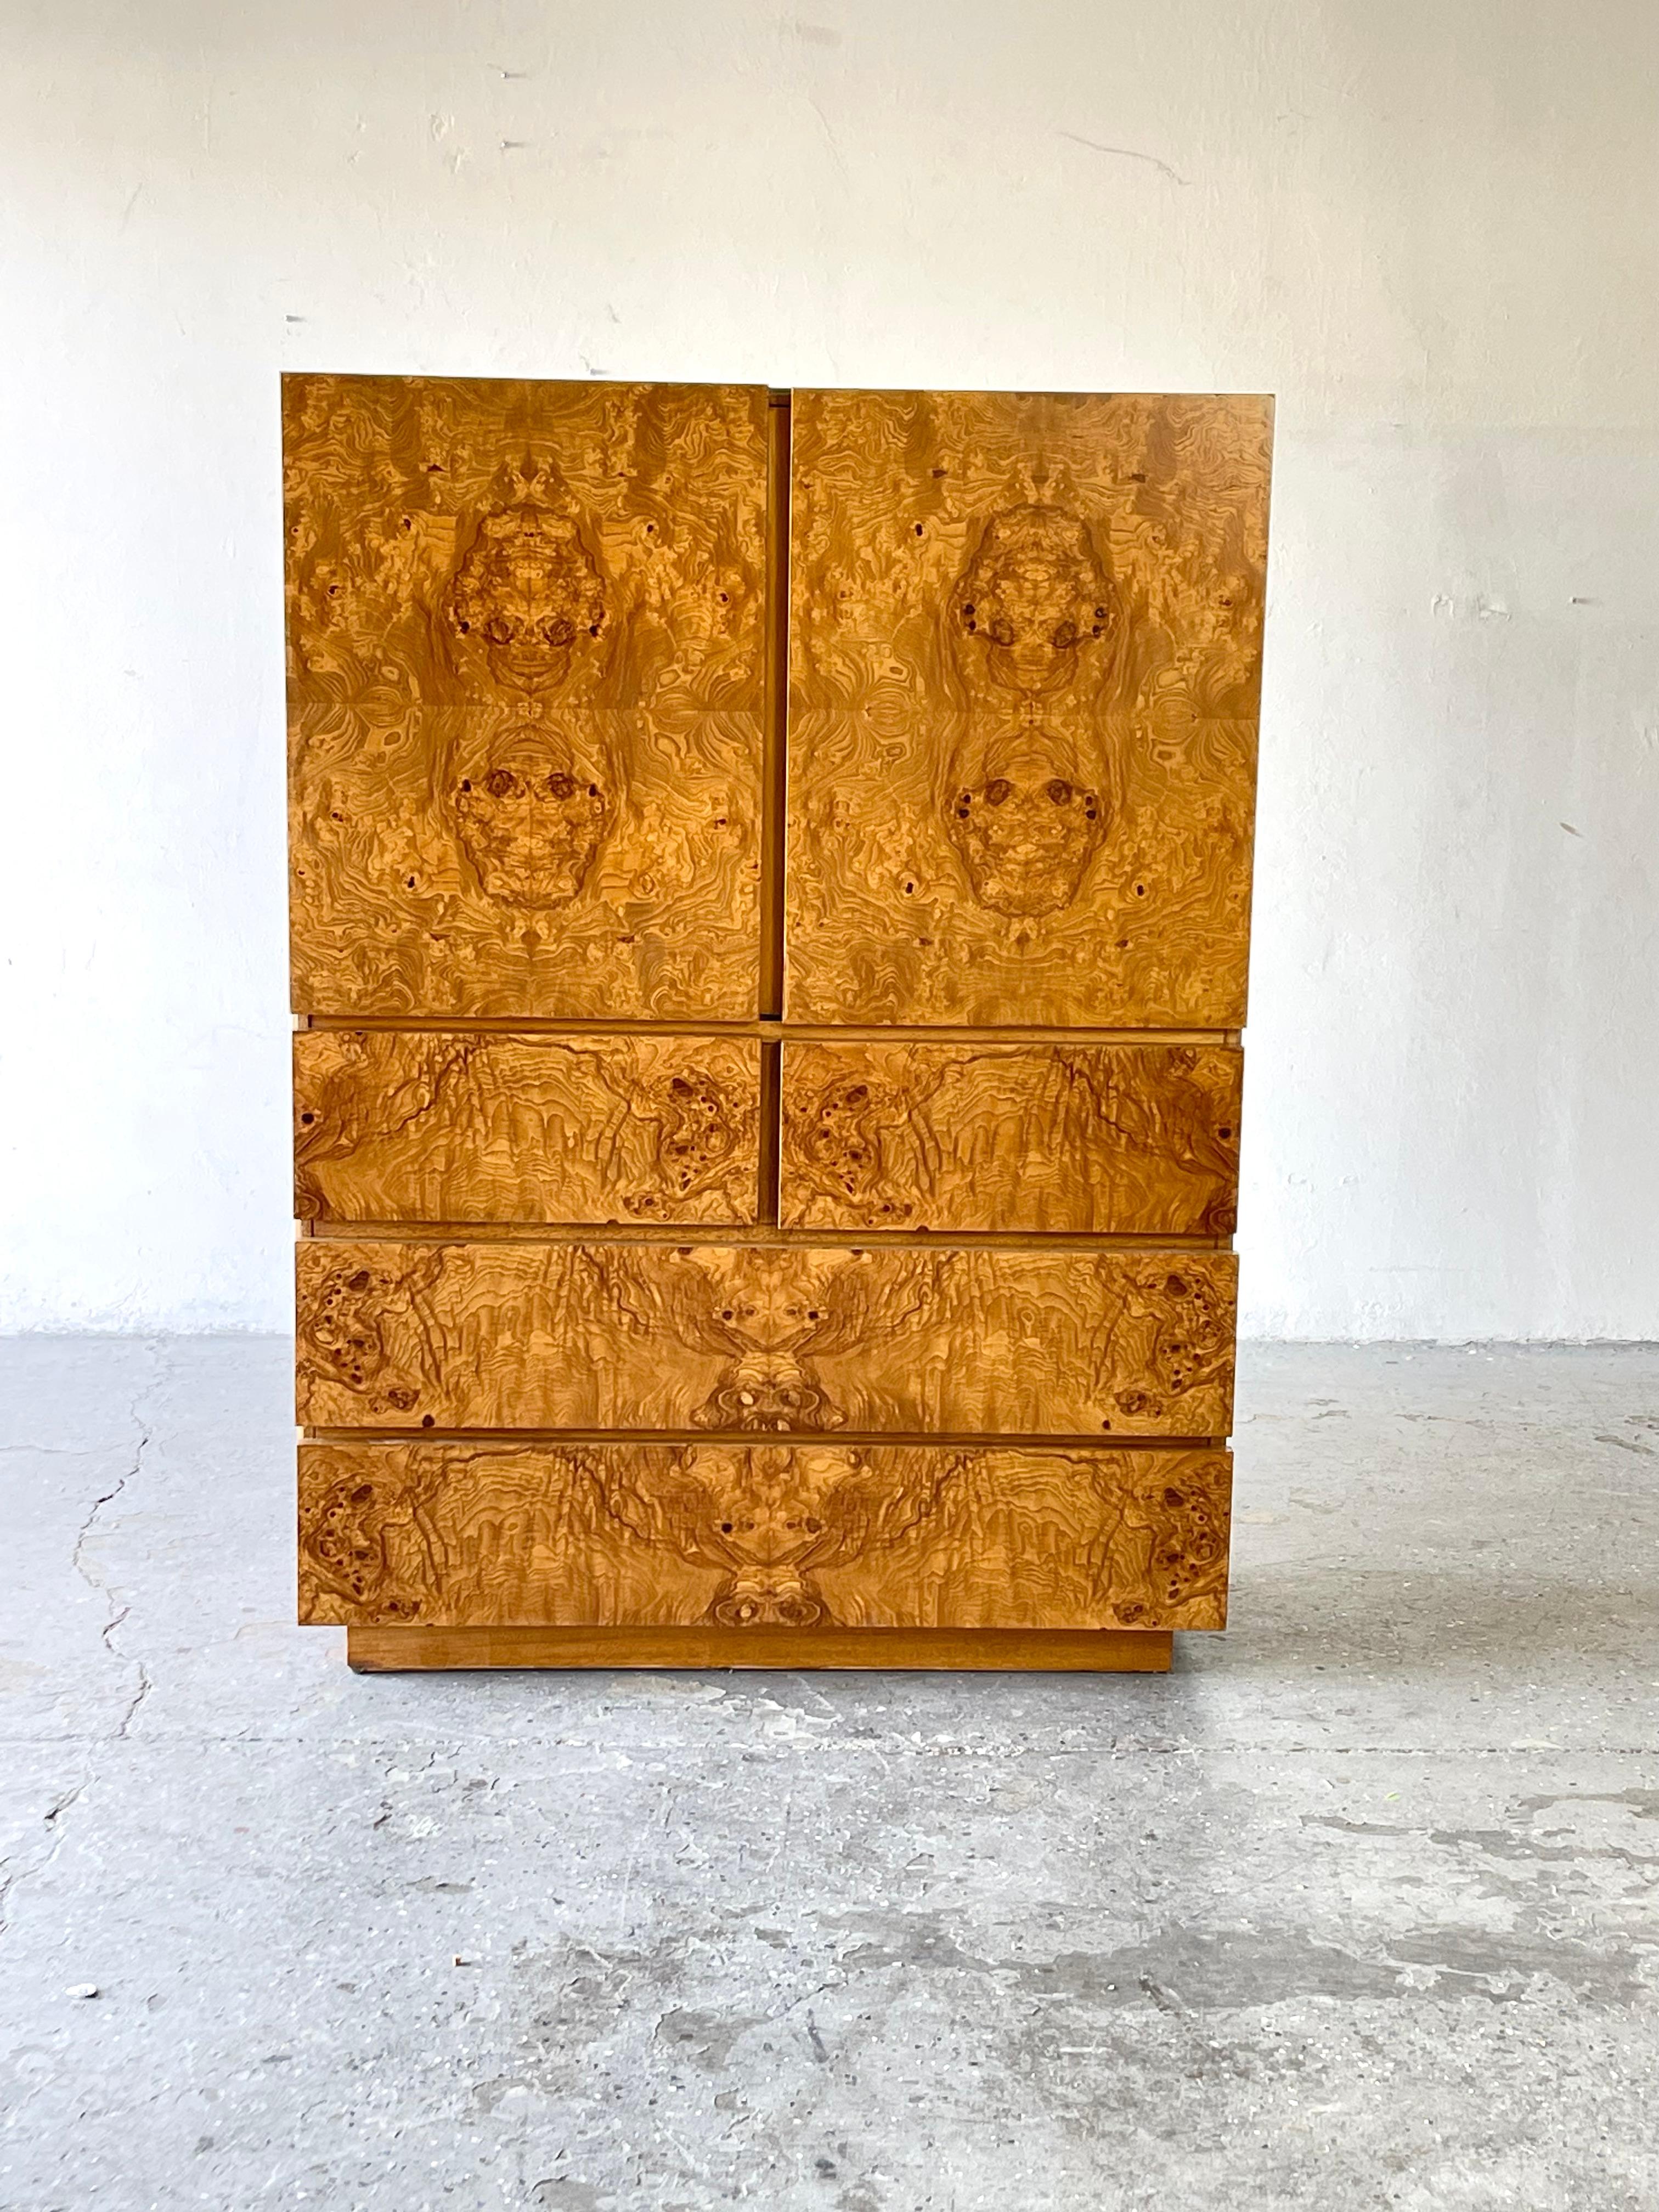 1970s Mid-Century Modern Roland Carter for Lane Burl Wood Armoire.
Absolutely gorgeous1970s burl-wood dresser. Originally designed by Roland Carter for Lane Furniture, this 